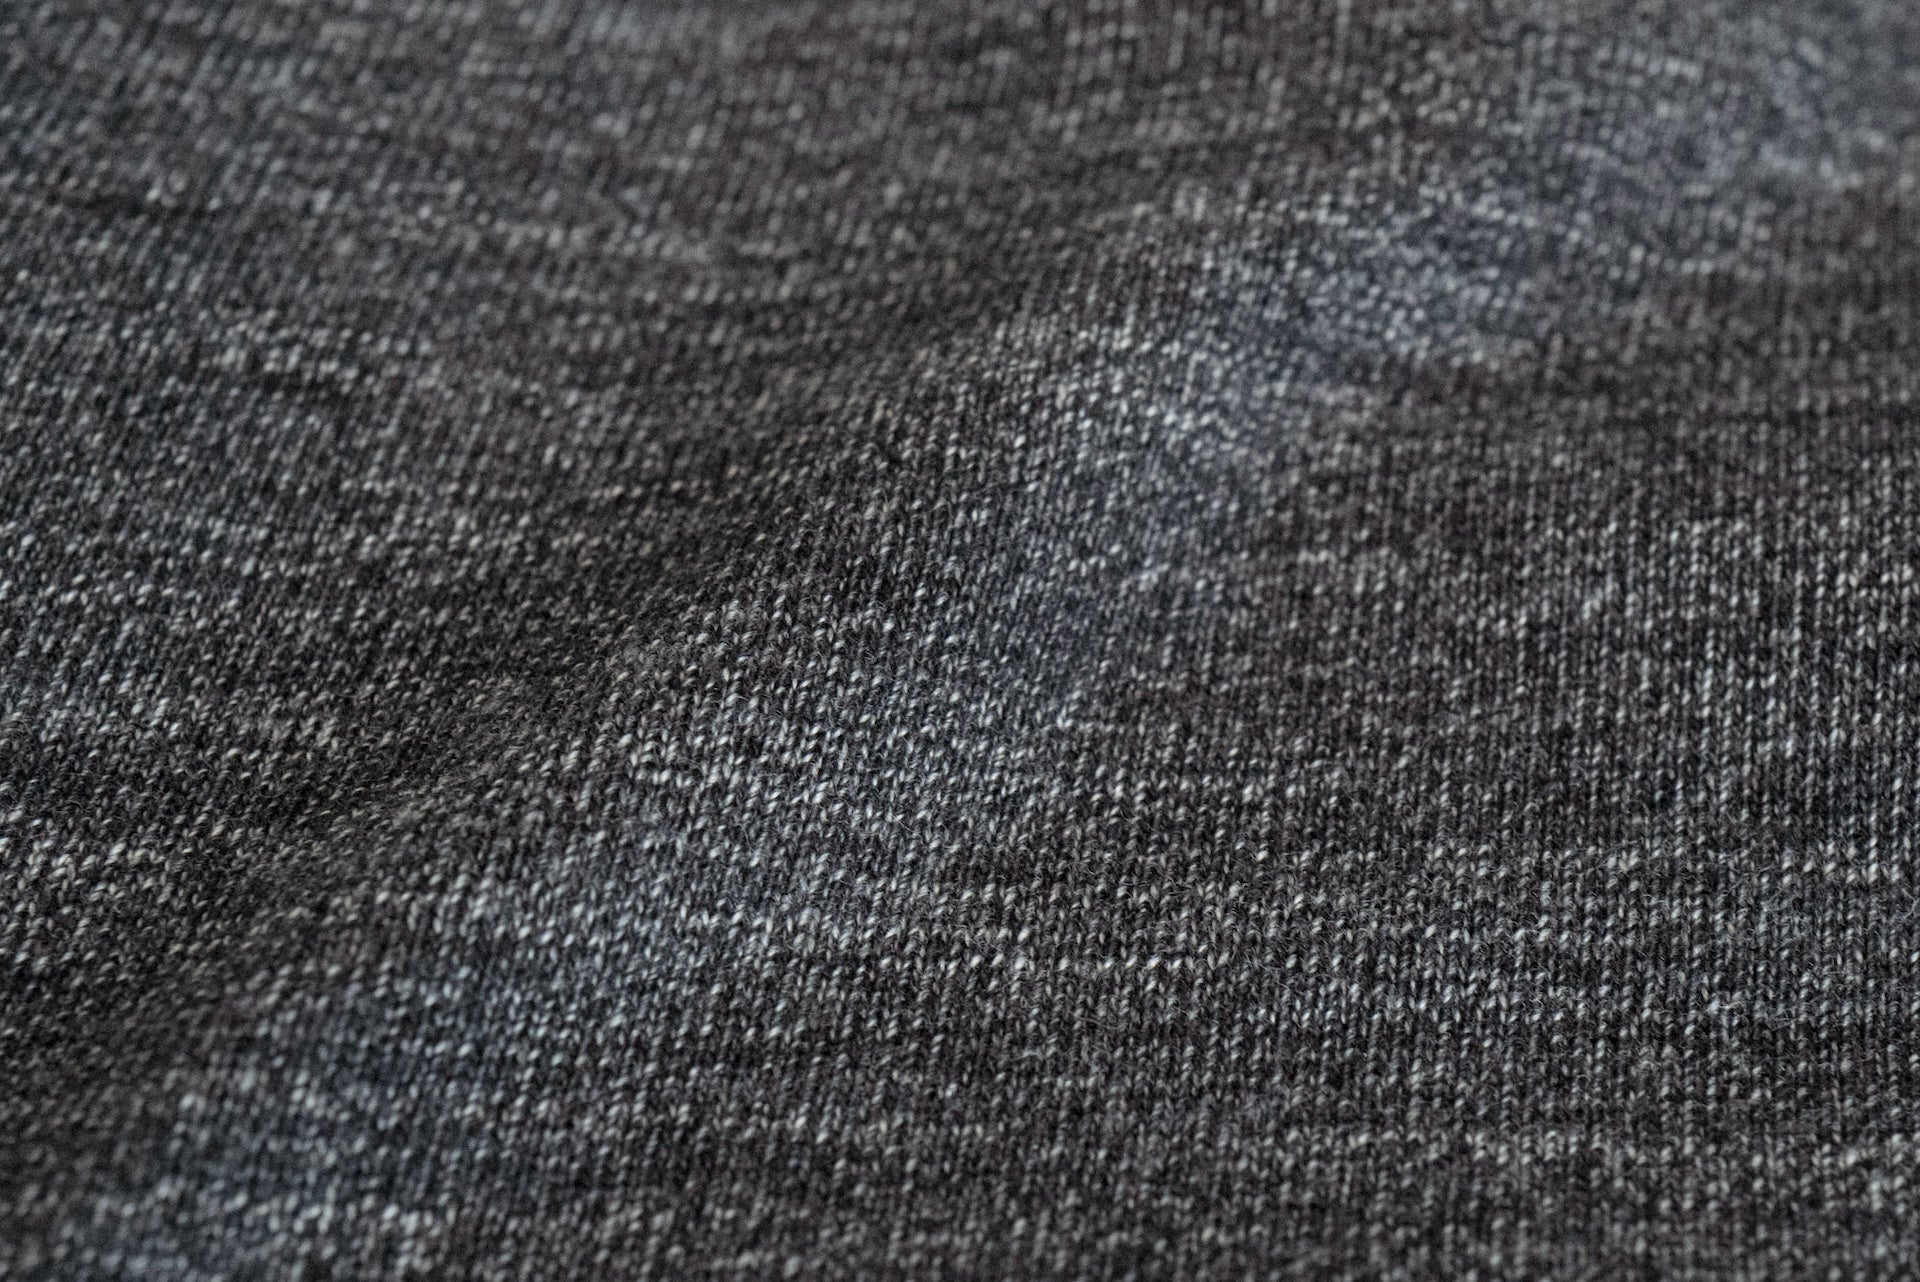 Studio D'Artisan X CORLECTION 7.5oz 'Suvin Gold' Ultimate Loopwheeled L/S Henley Tee (Heather Ink)